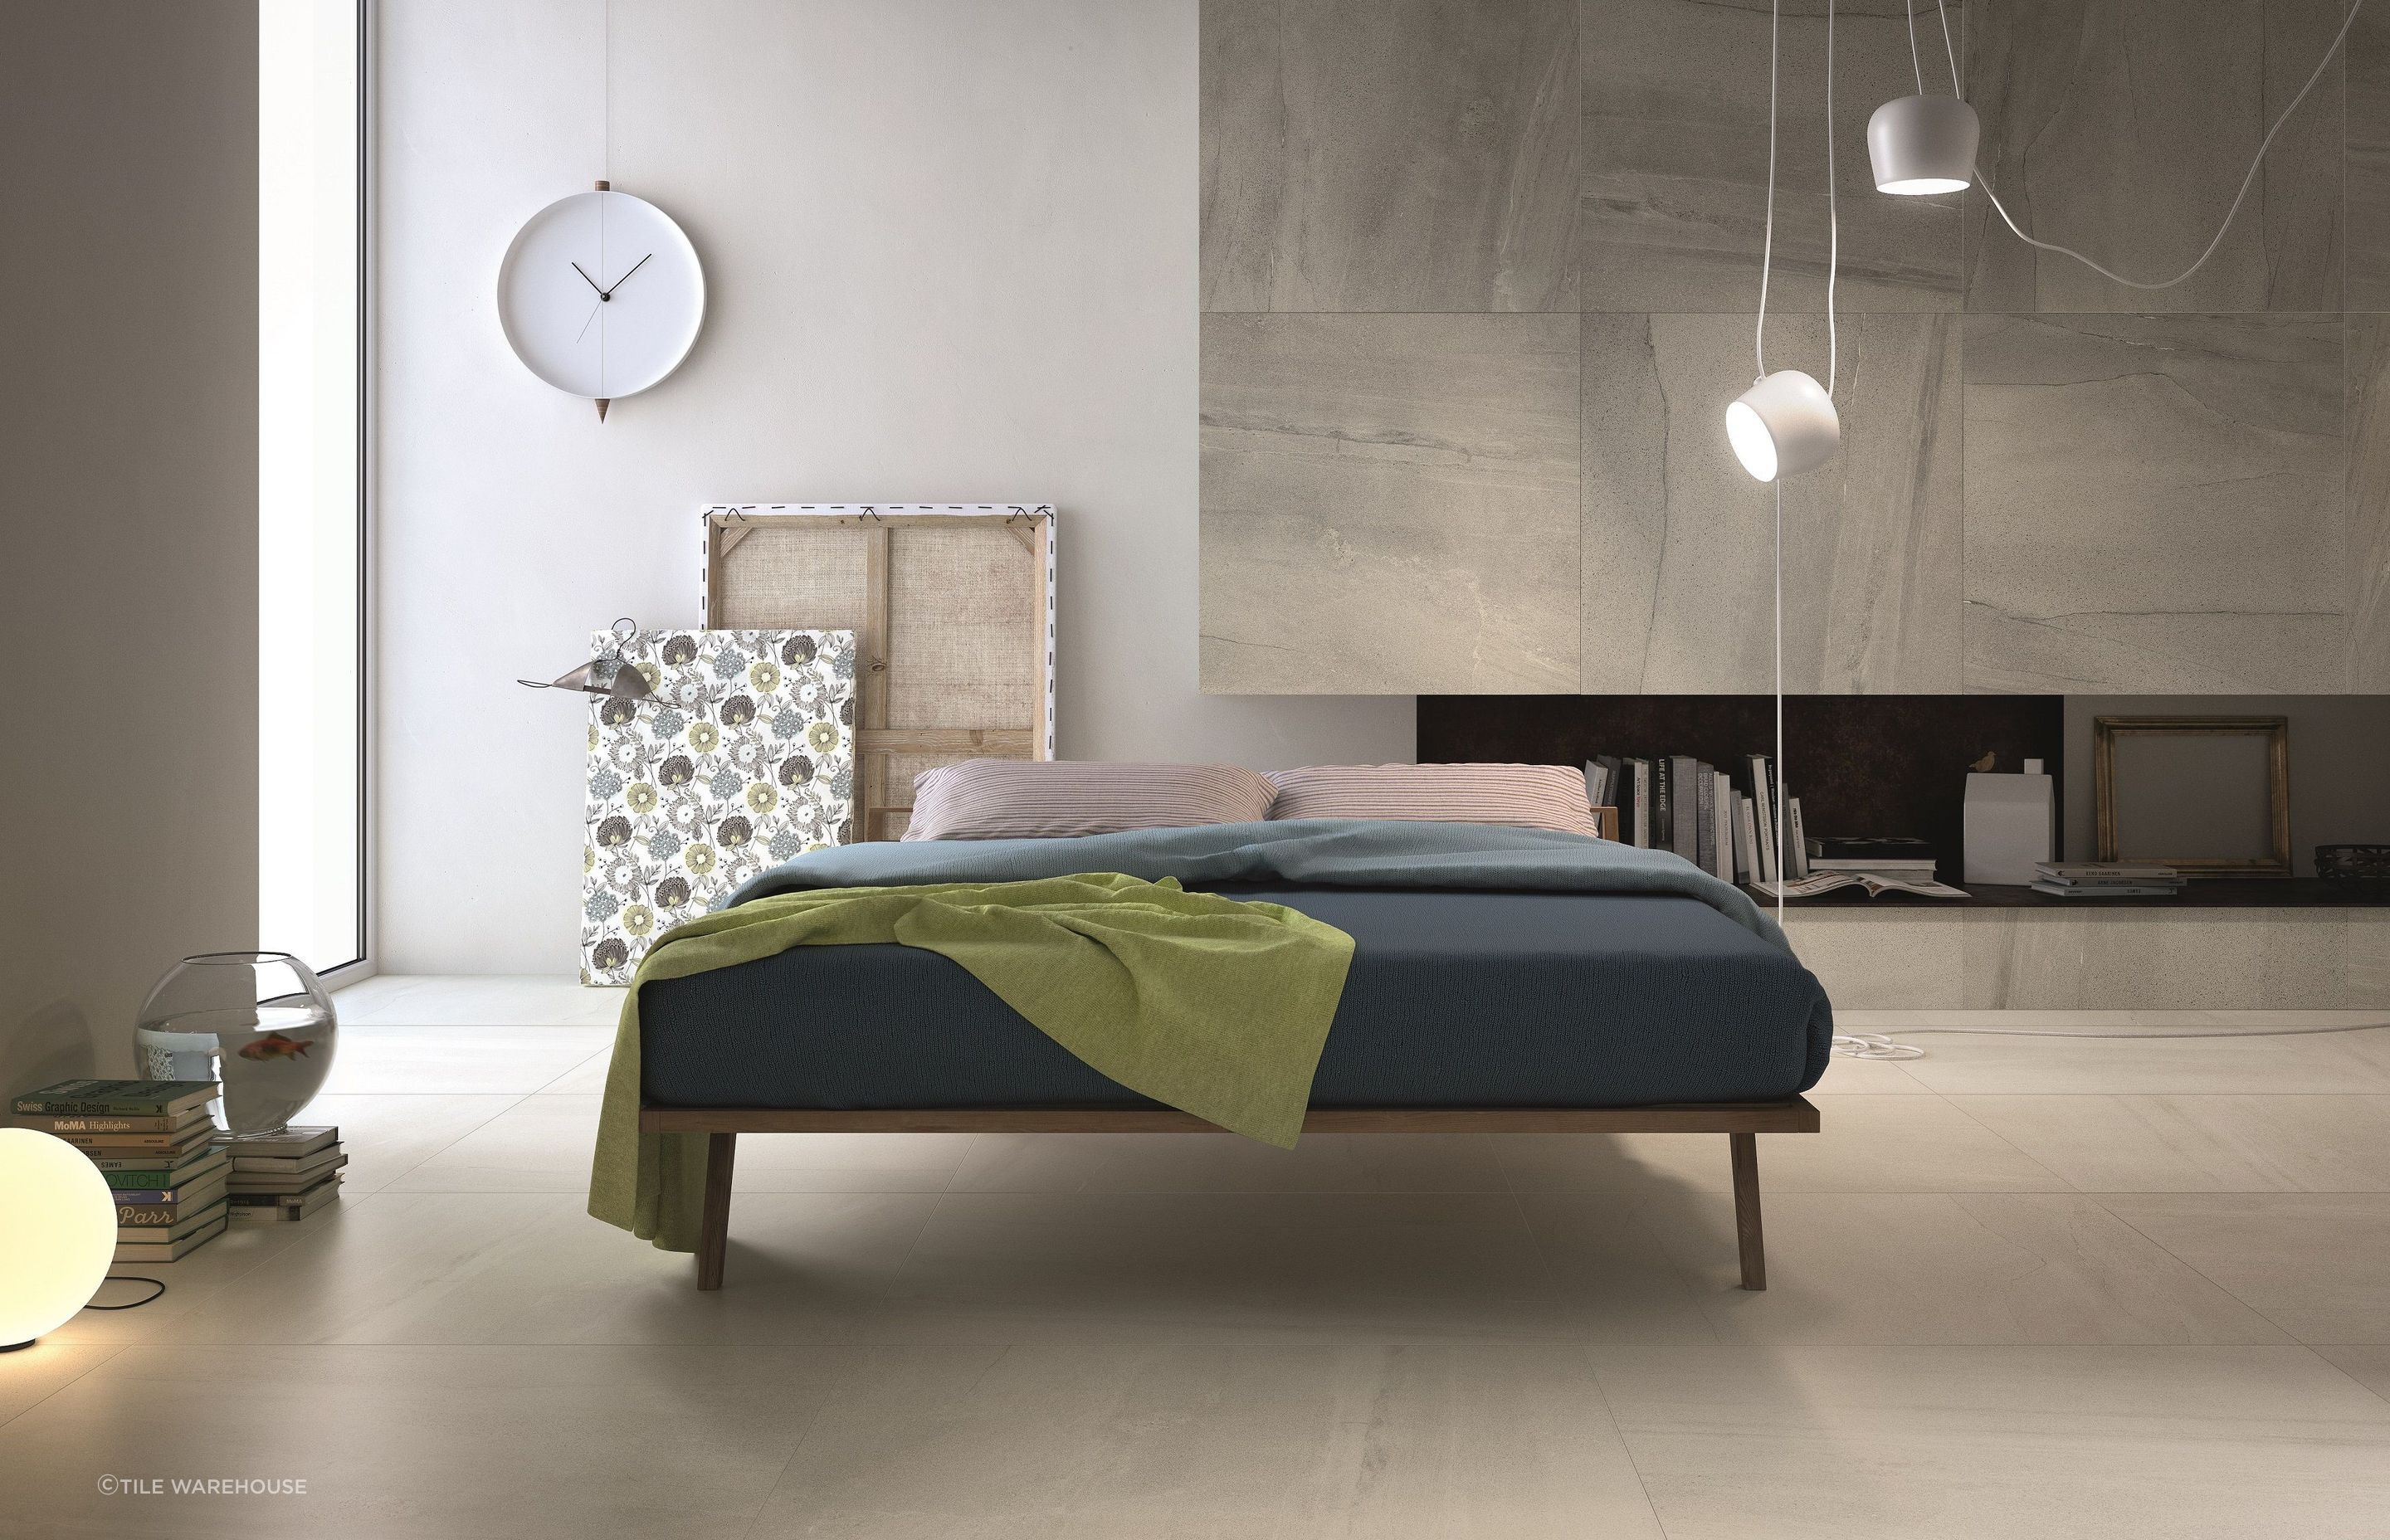 The Basaltina Wall and Floor Tile, available in three colorways and large format 1000x1000m